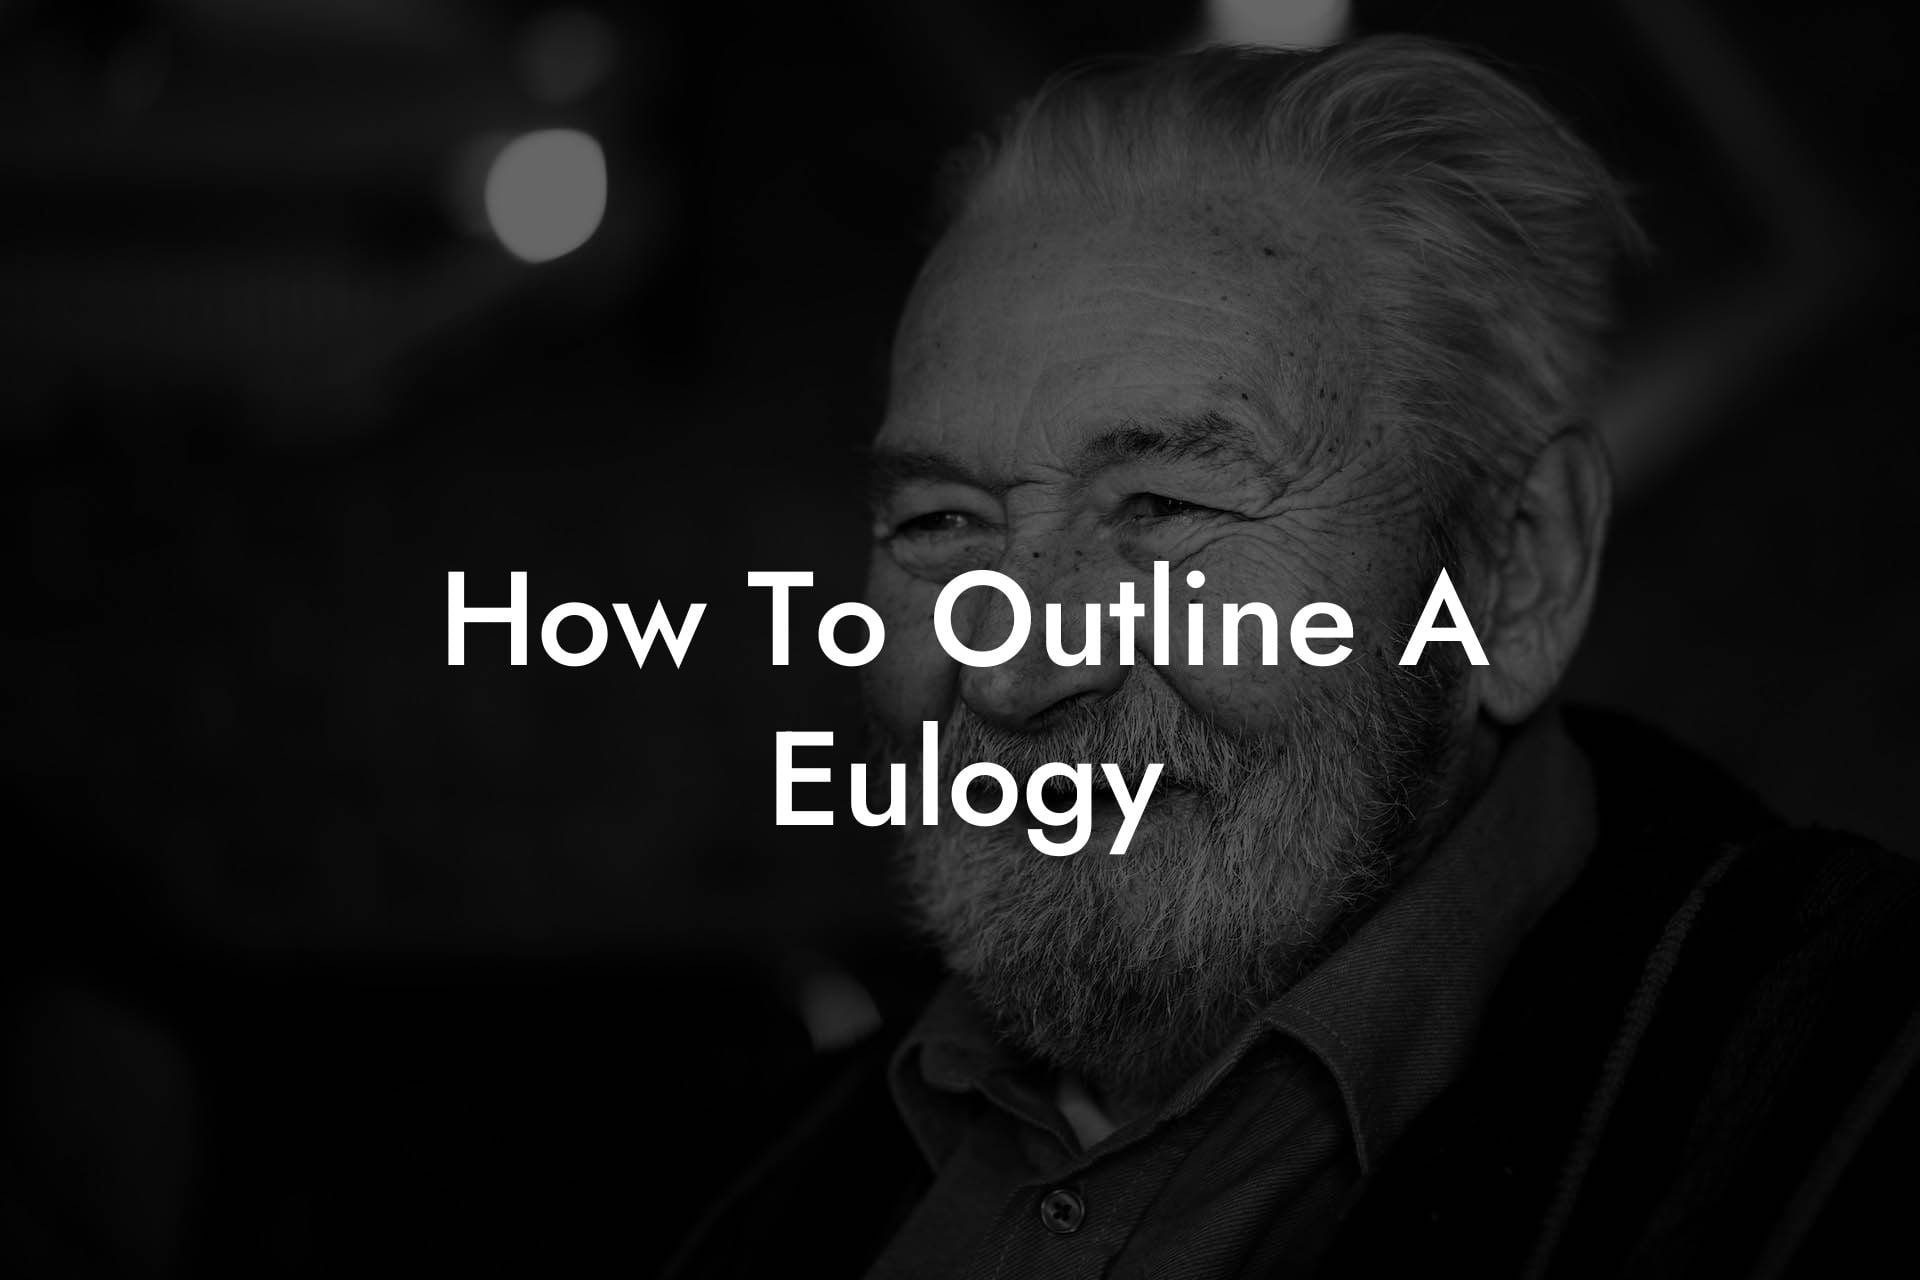 How To Outline A Eulogy